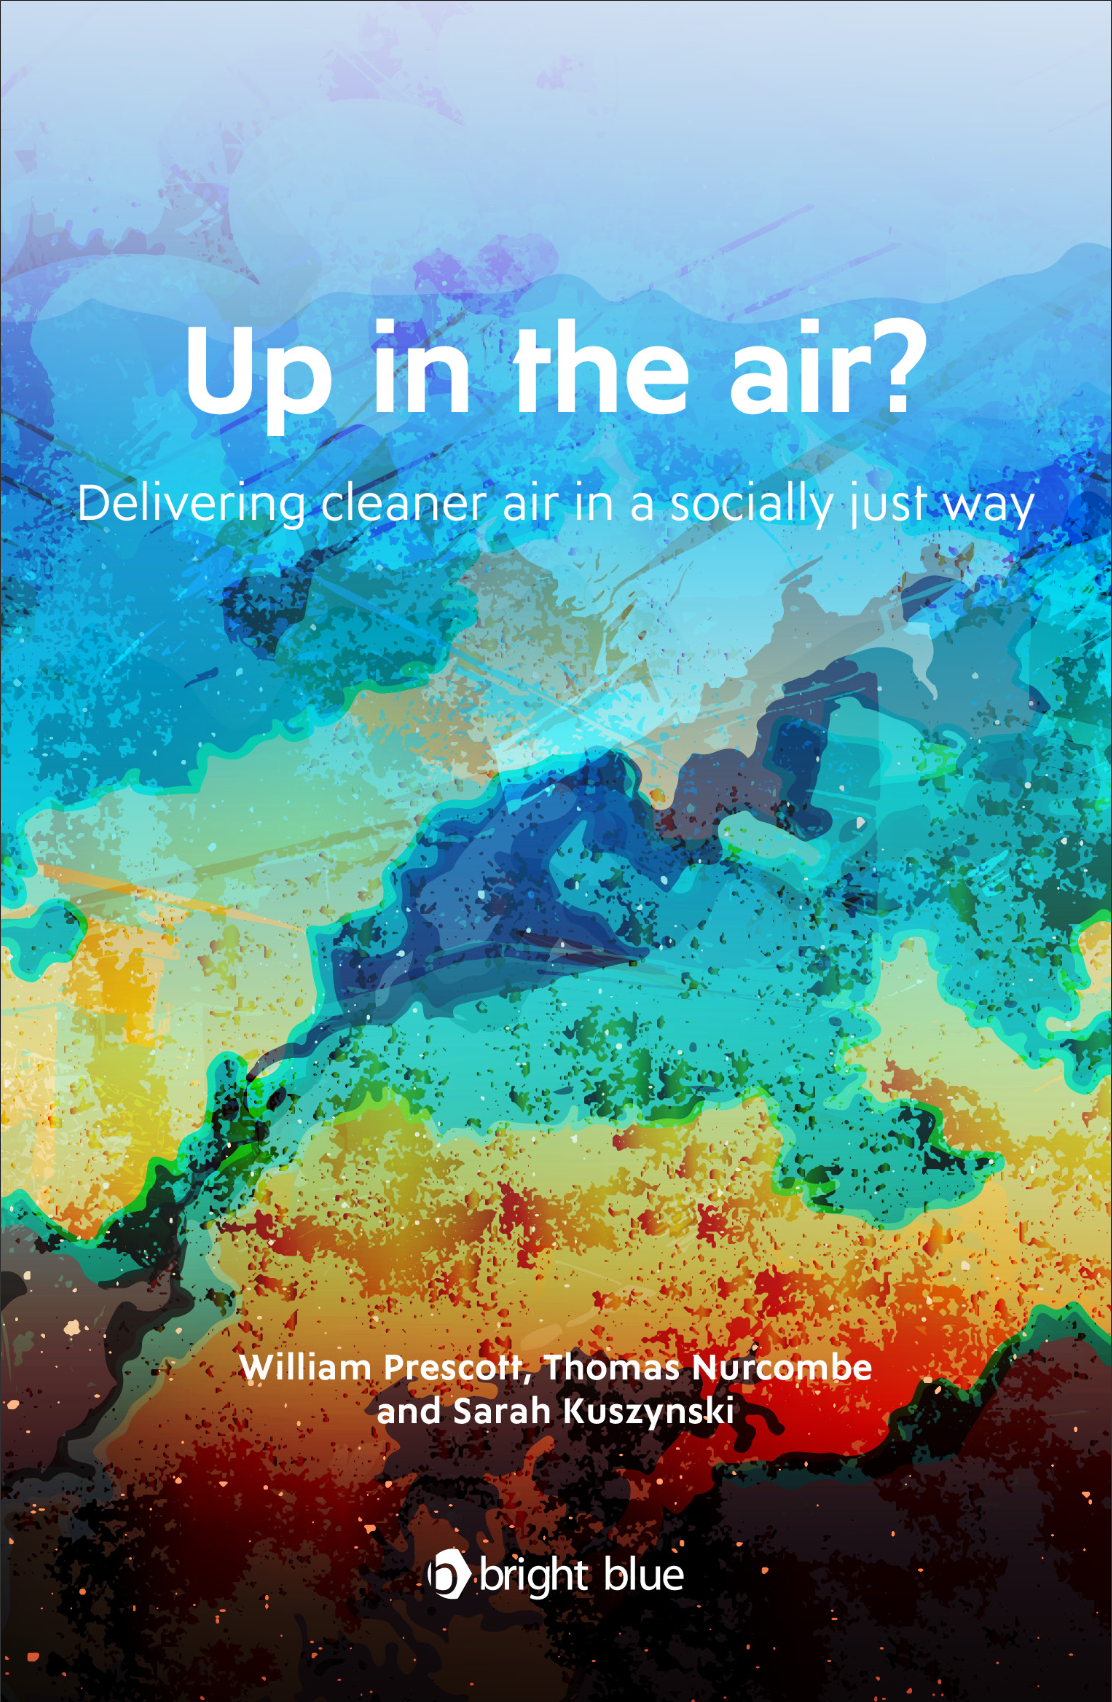 Up in the air? Delivering cleaner air in a socially just way